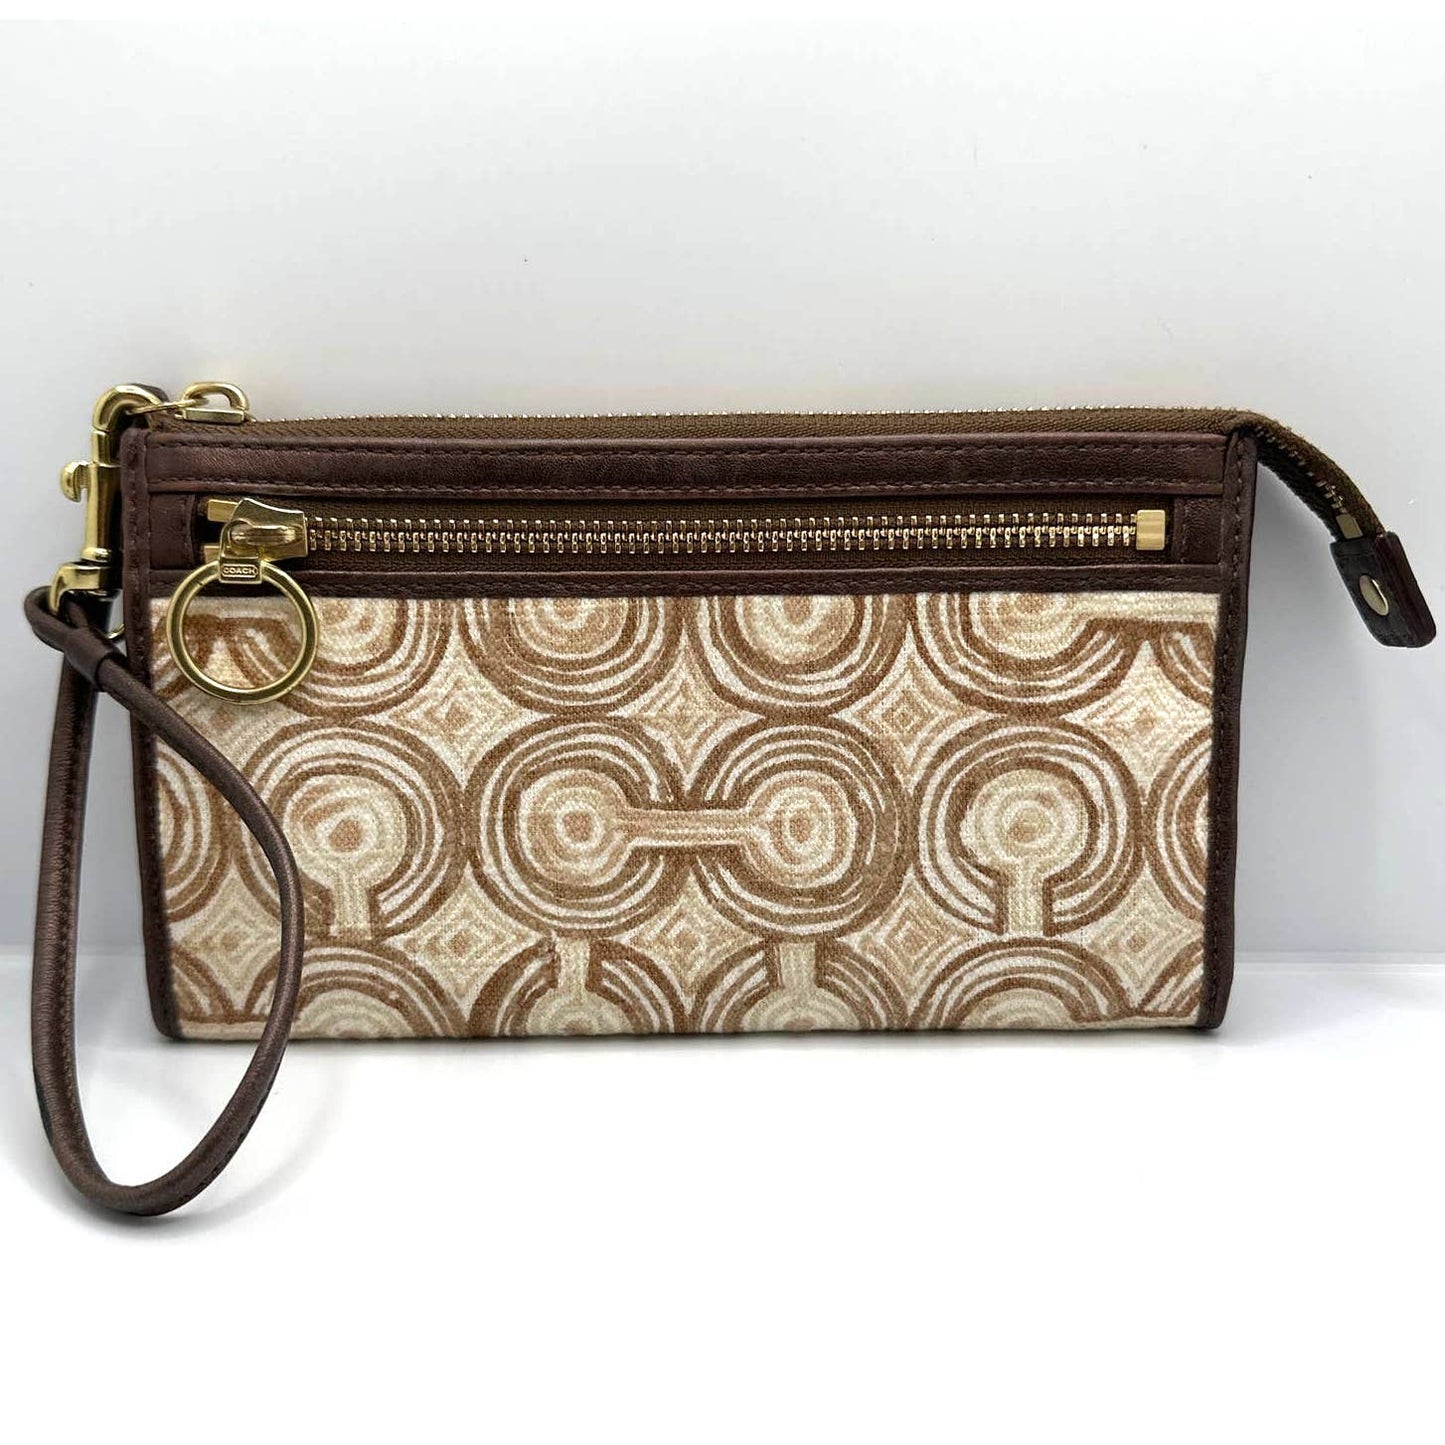 COACH Brown and Aud Tan Optic Swirl Wallet / Wristlet